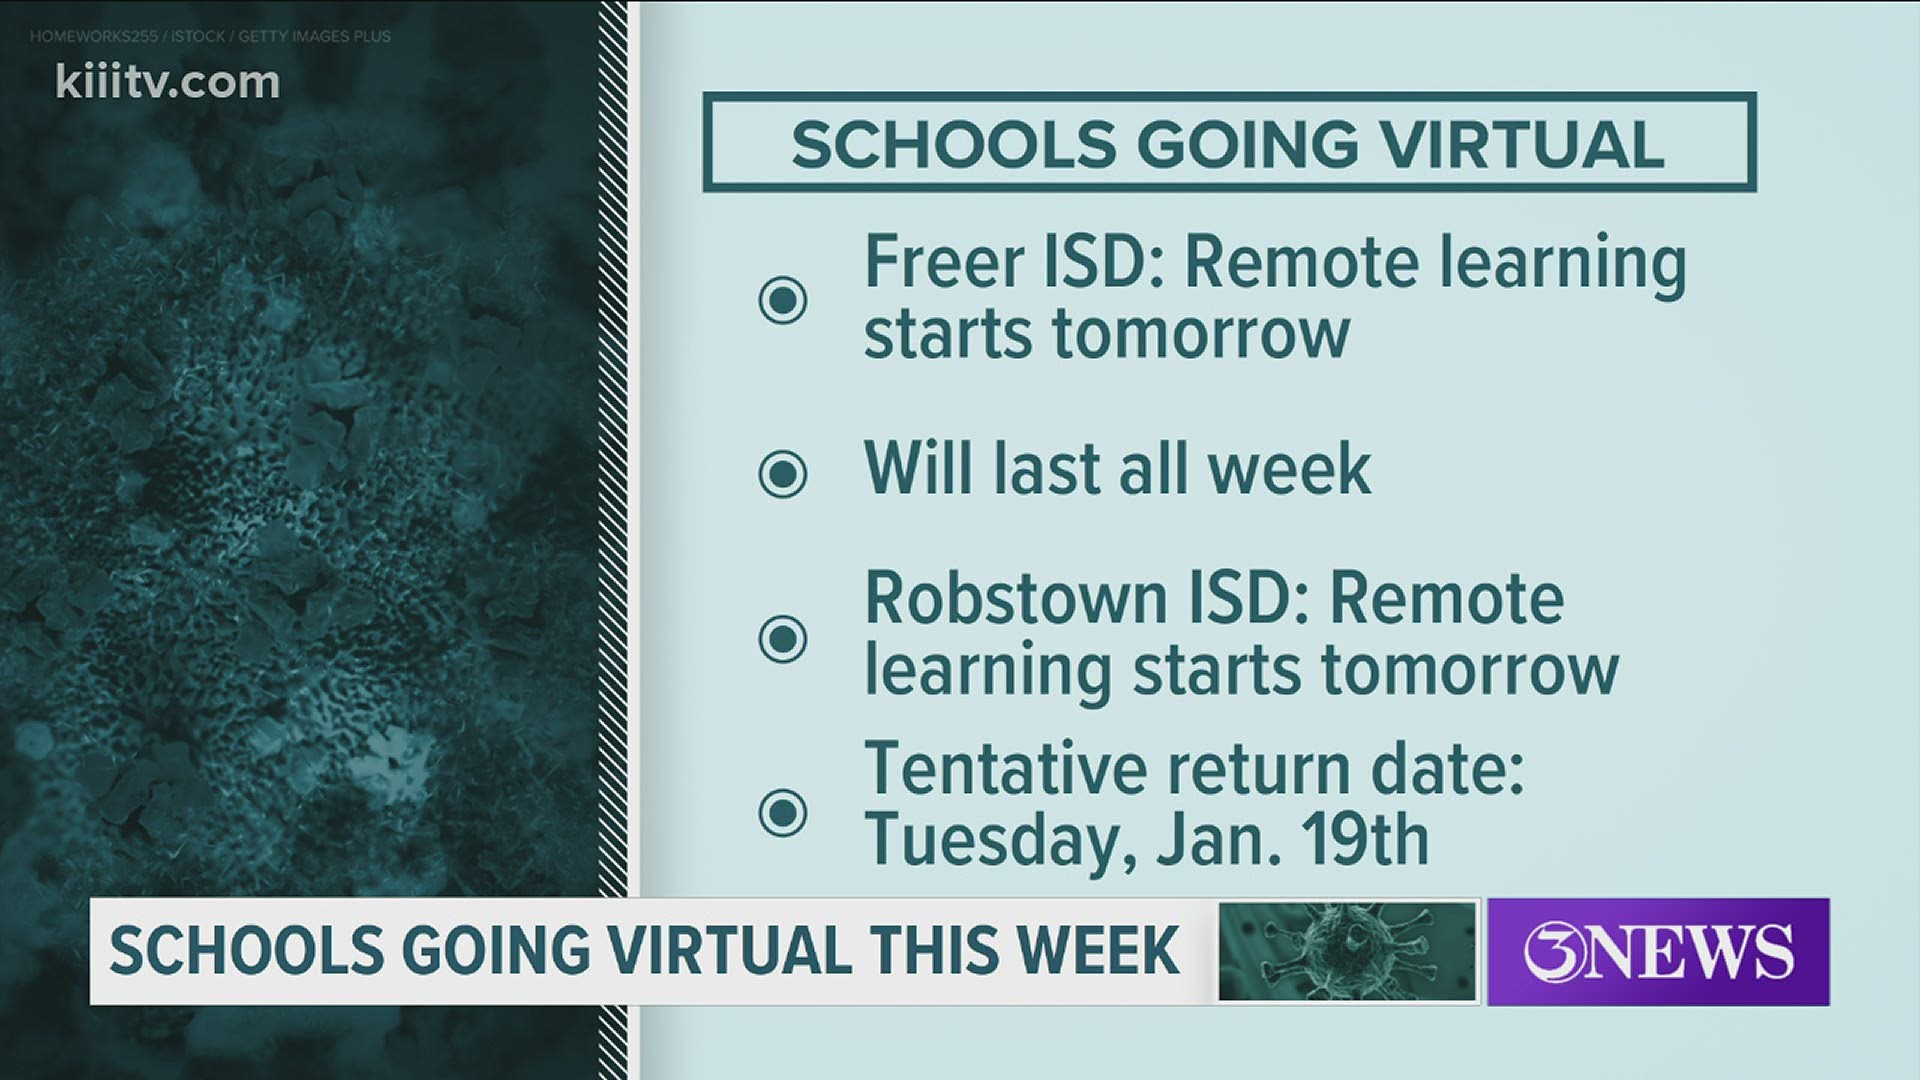 The district had been allowing face-to-face instruction but made the decision to go virtual for the rest of this week to keep holiday COVID-19 cases from growing.